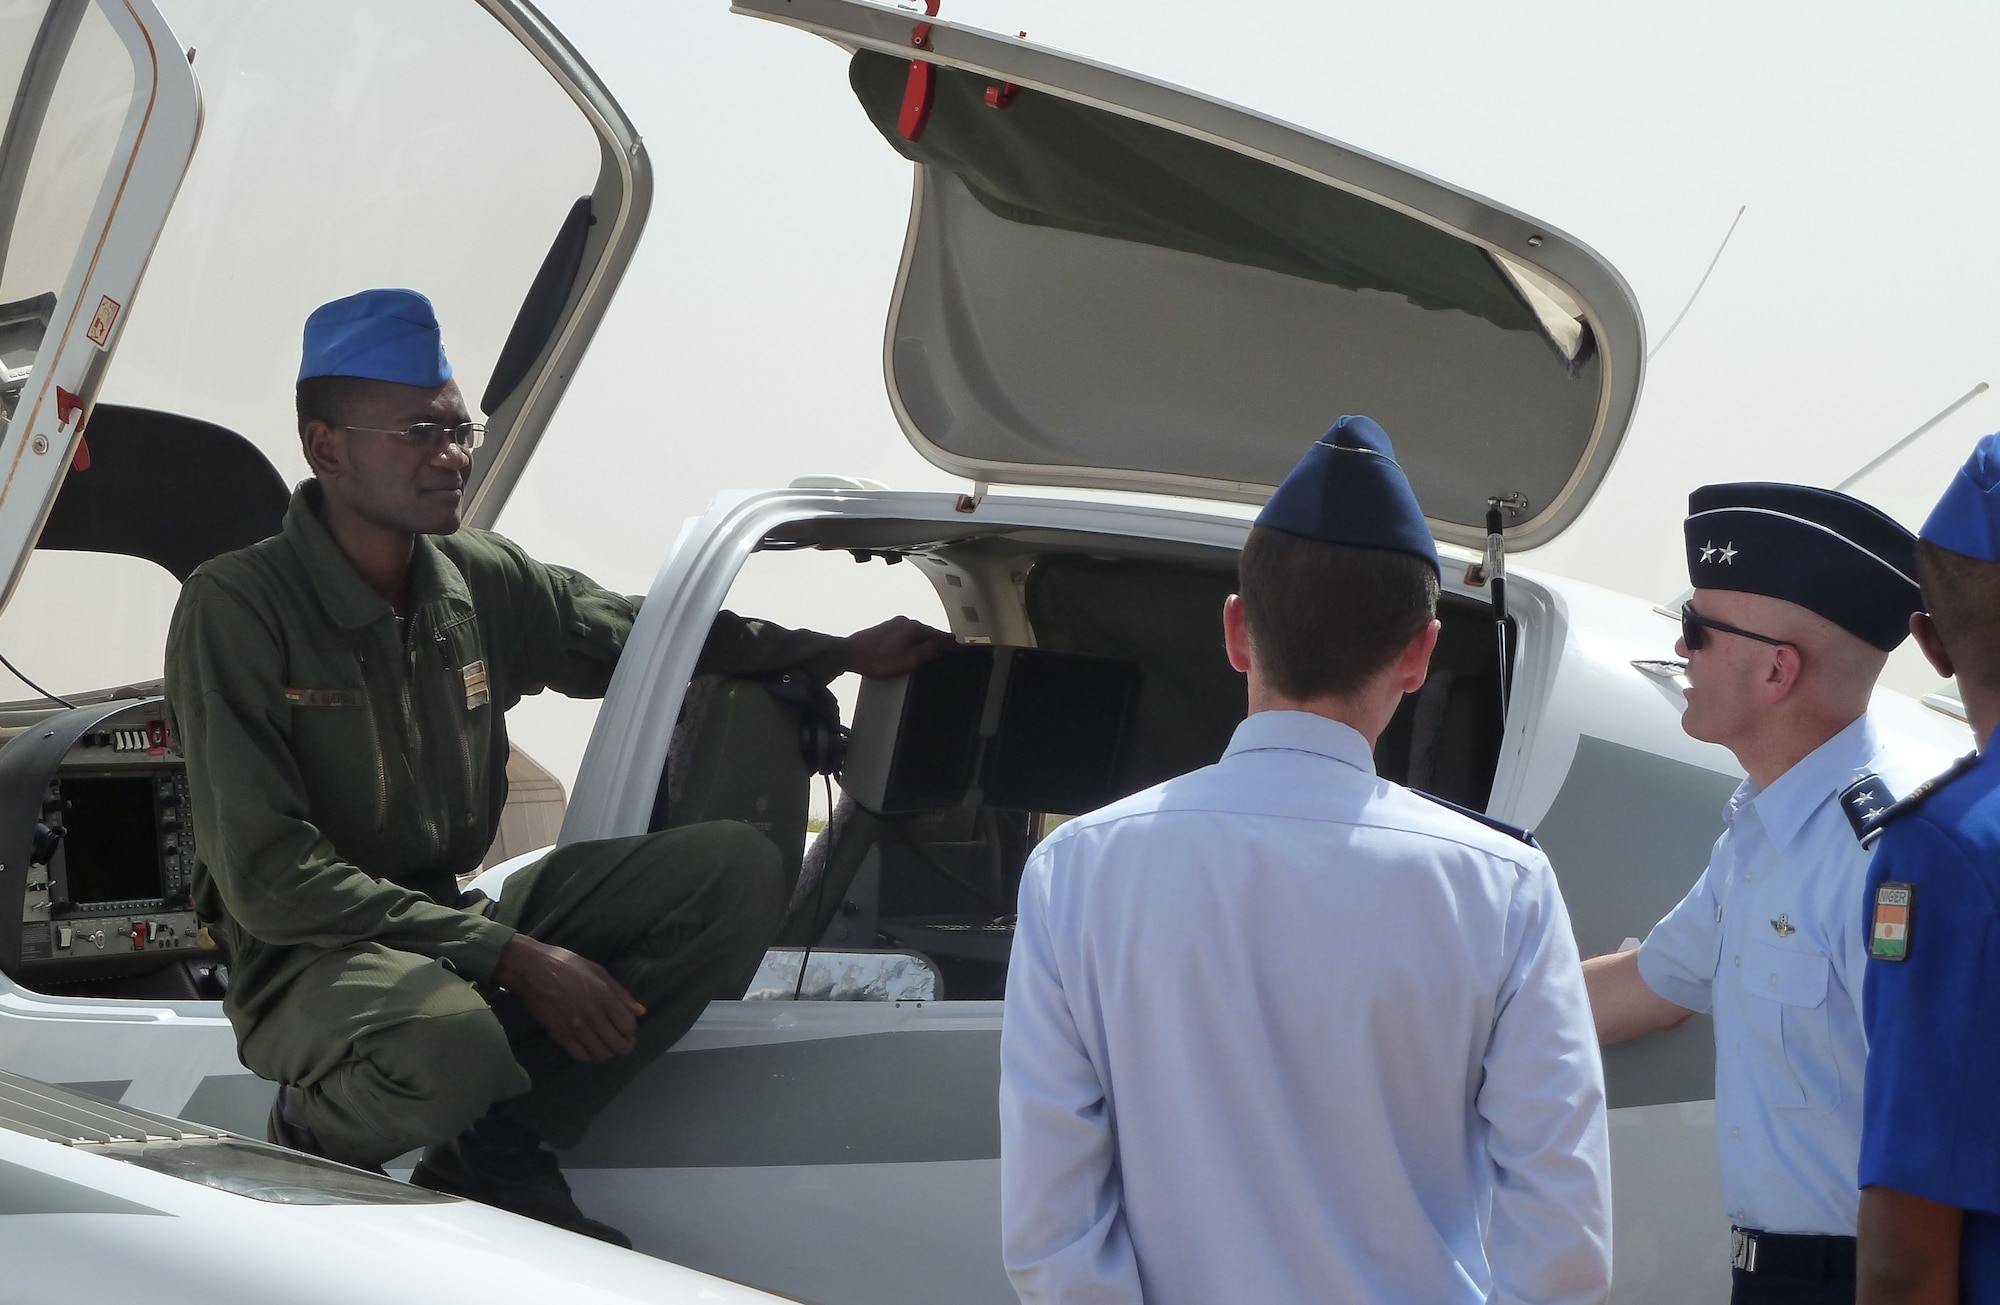 U.S. Maj. Gen. Carlton D. Everhart II, 3rd Air Force vice commander, discusses the capabilities of Nigerien air force assets with airmen at Base Aerienne 101, Niamey, Niger April 29, 2013. Everhart visited with Nigerien senior military leaders and airmen to exchange techniques and ideas on strengthening partnership capacities between the two air forces. (U.S. Air Force photo by Capt. Reba Good/Released)
